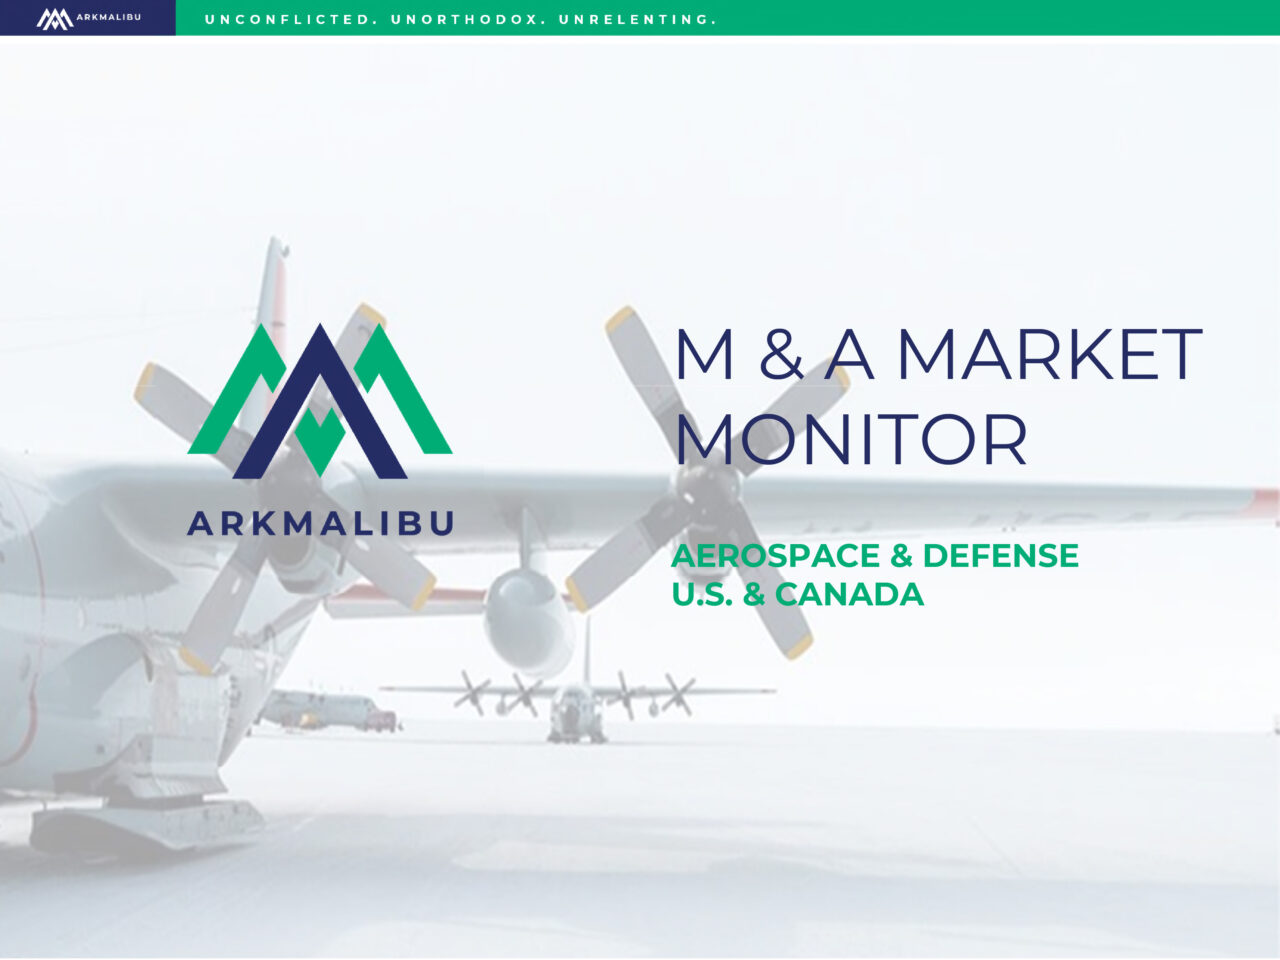 Market Monitor Cover for Aerospace & Defense. Faded Plane on a runway in the background